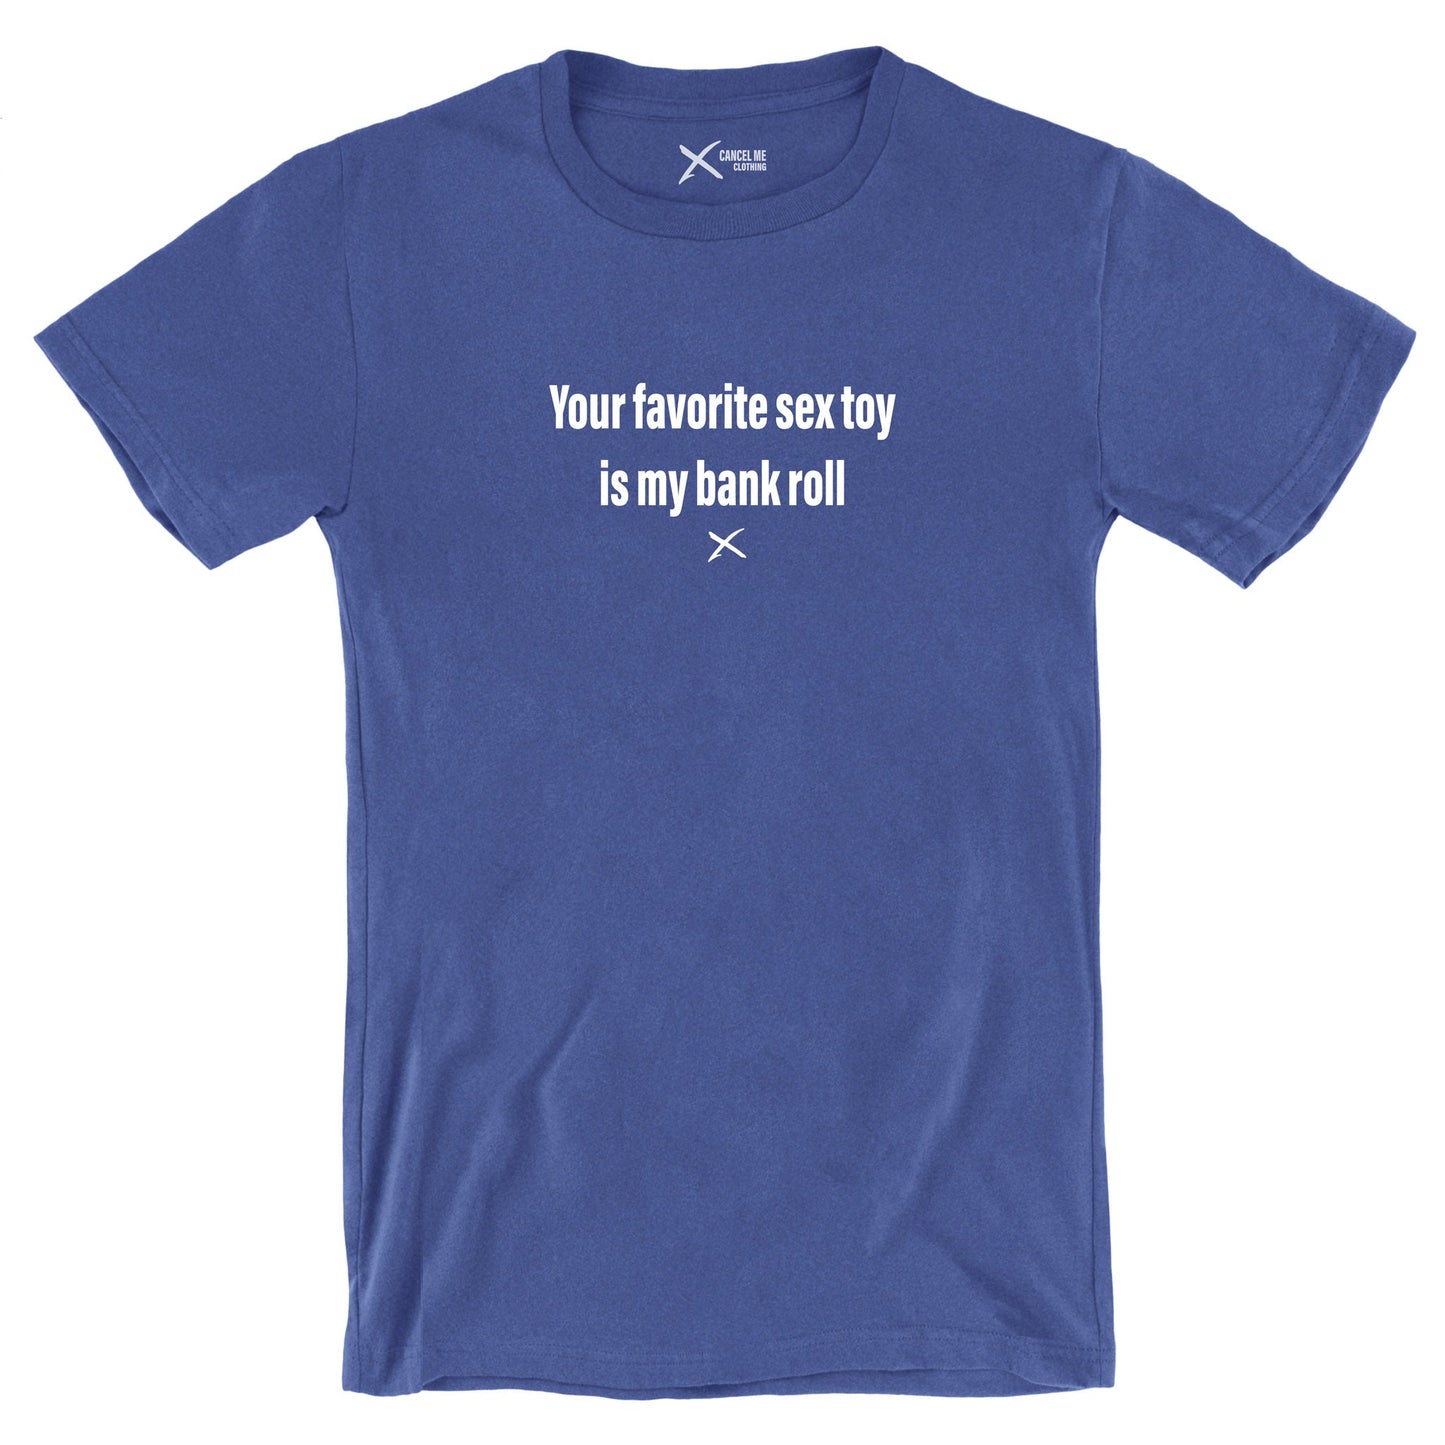 Your favorite sex toy is my bank roll - Shirt